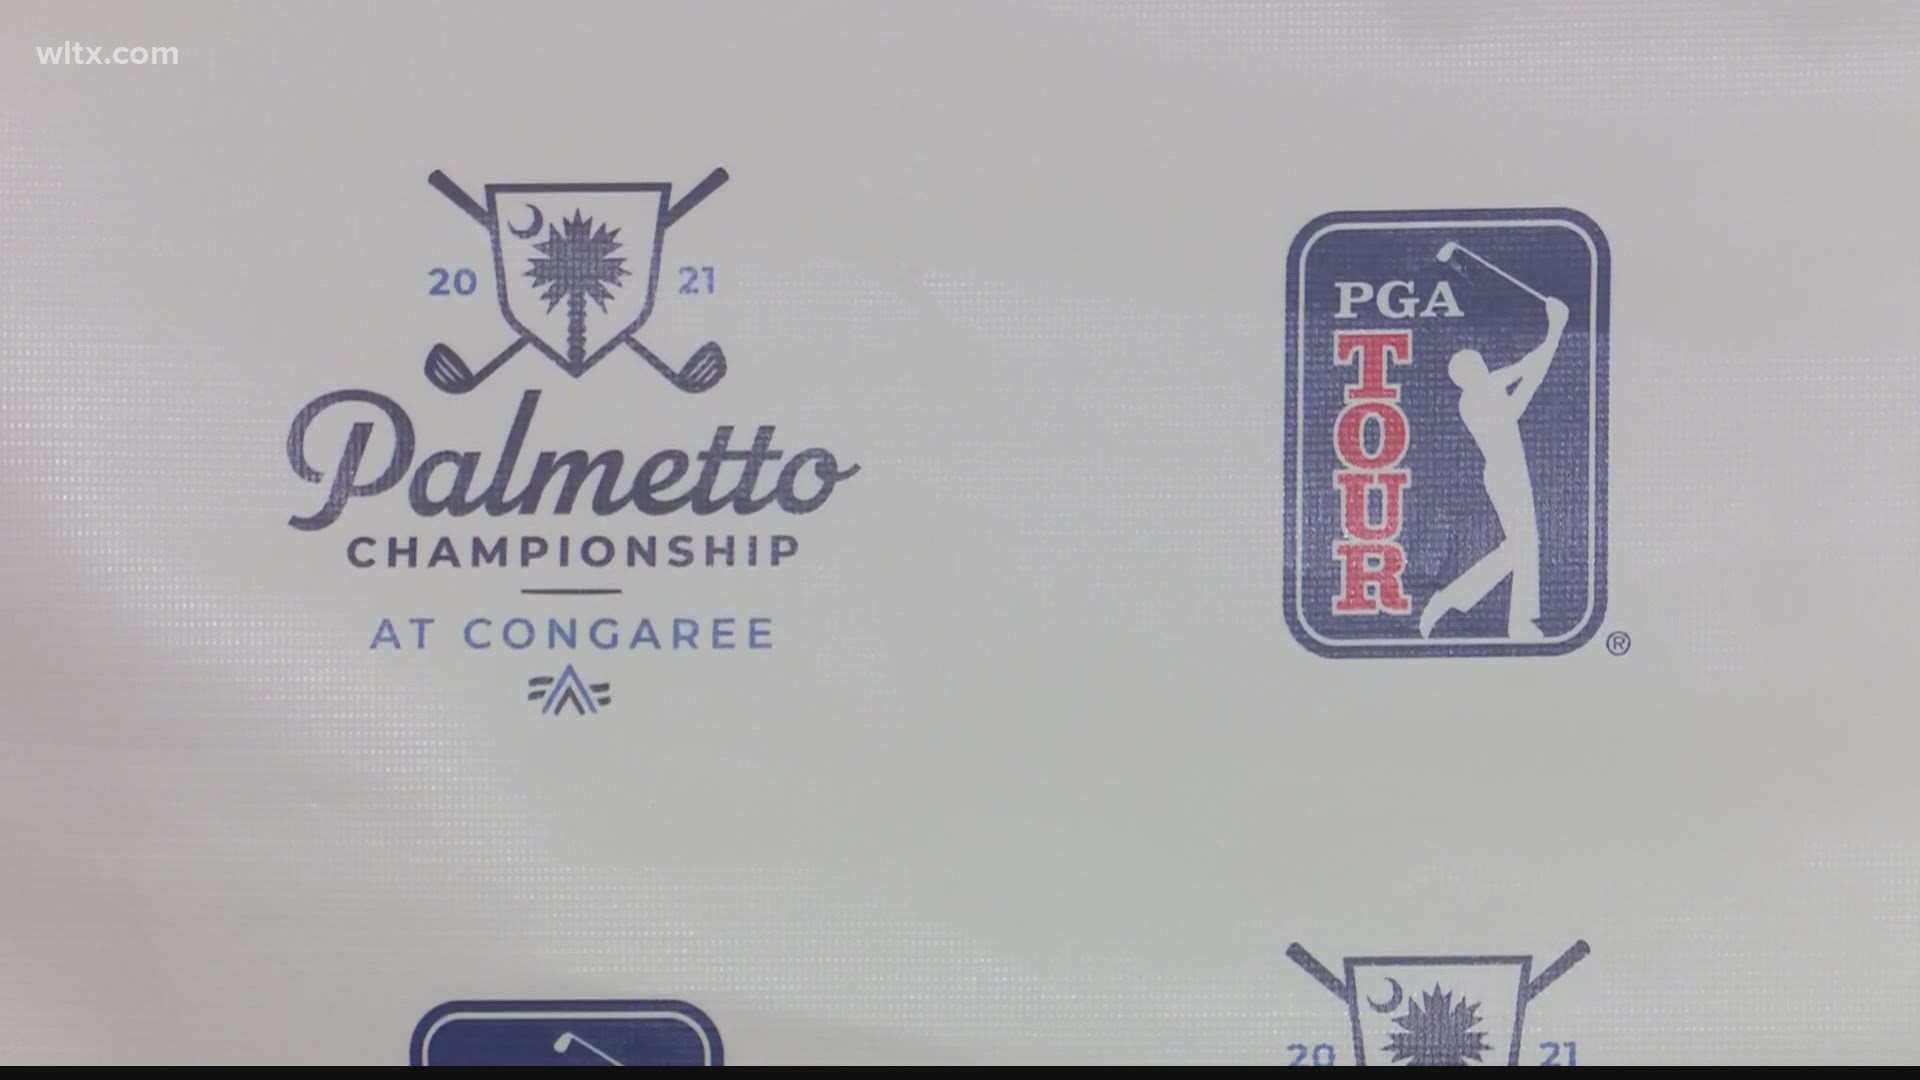 South Carolina Gov. Henry McMaster, alongside state tourism leaders, announced the Palmetto Championship at Congaree will be played in June.